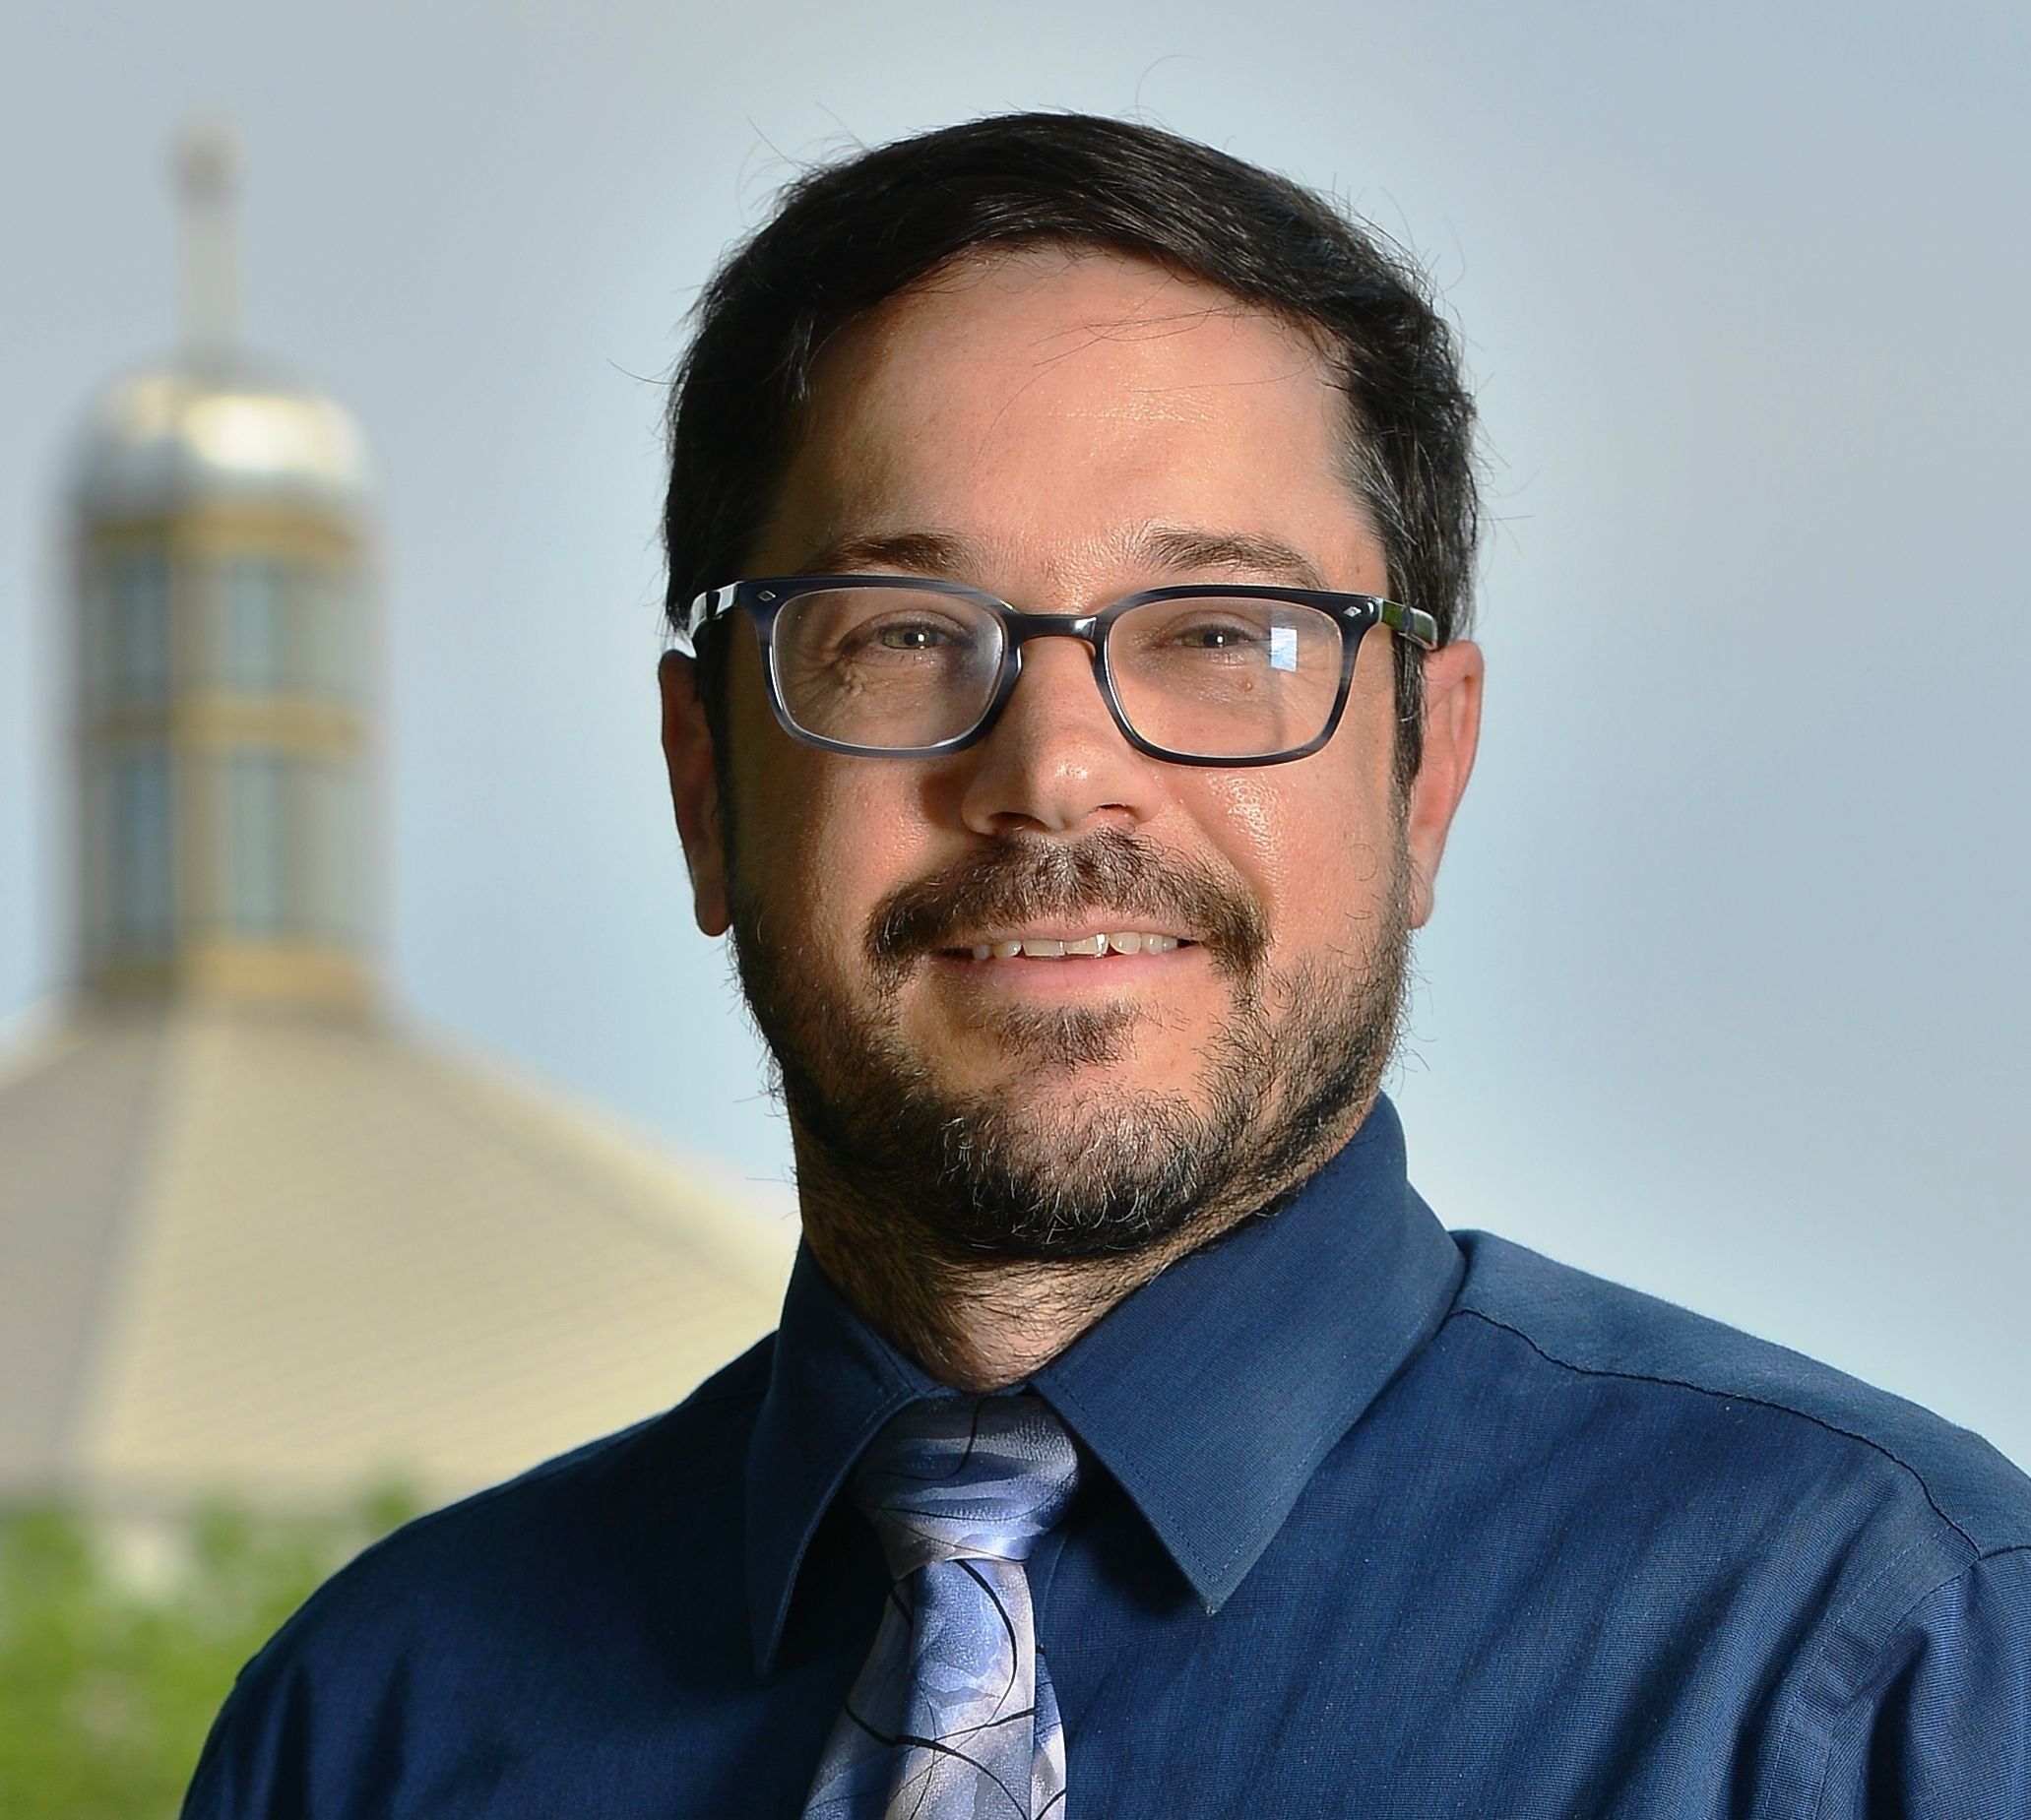 Head shot of Dr. Martino. He is wearing glasses, a dark blue shirt and blue tie, with St. Thomas Moore church in the background.